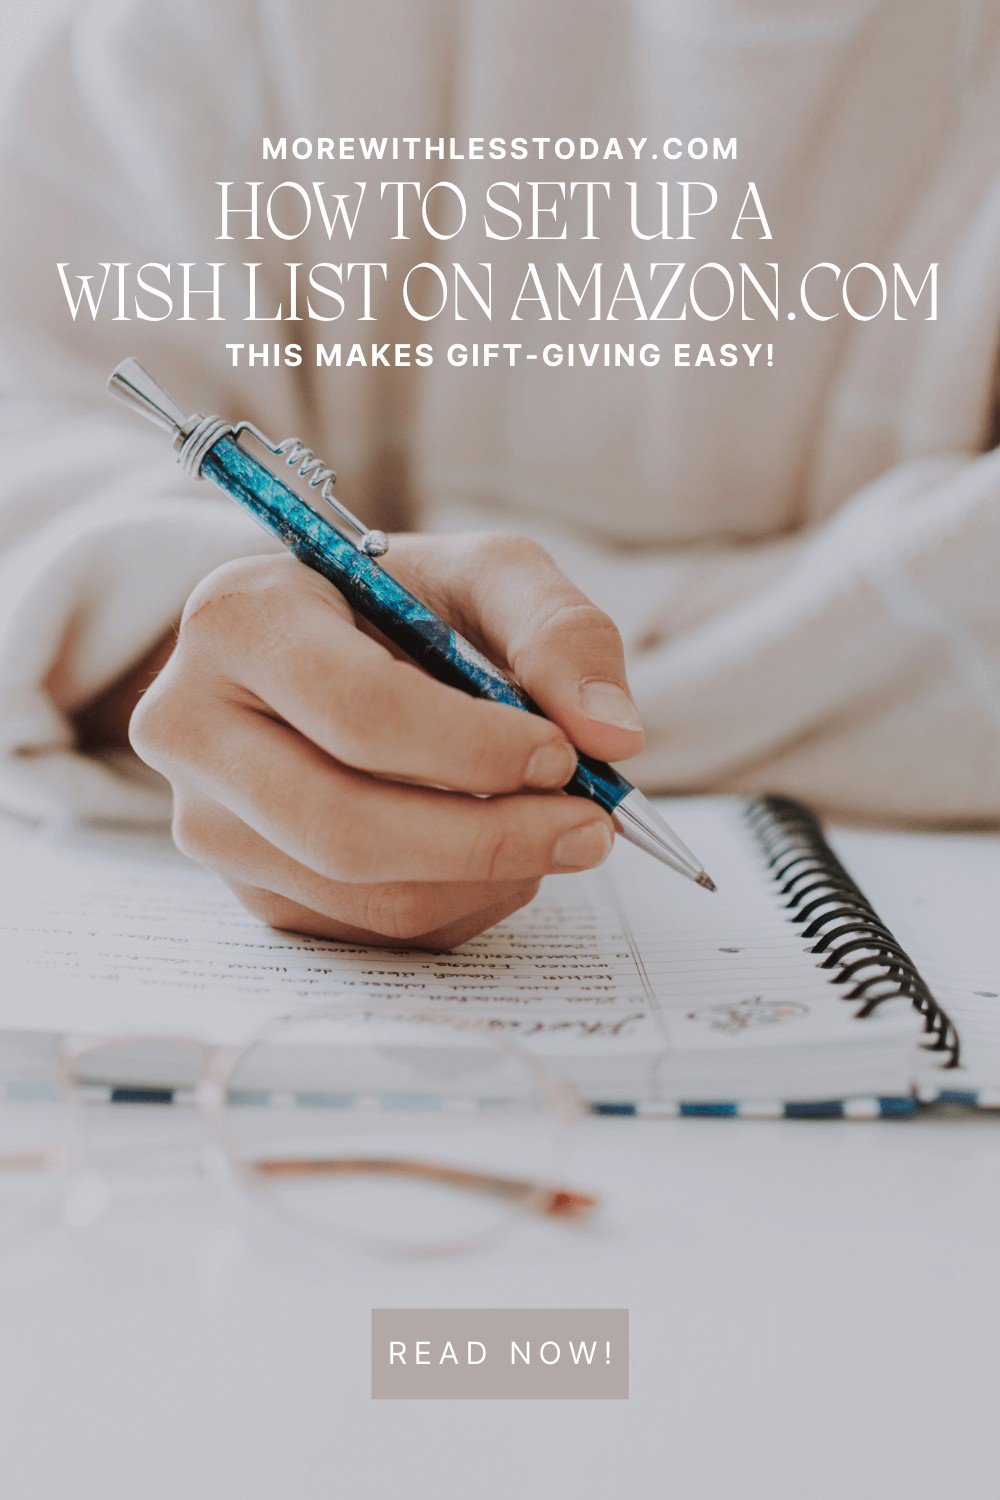 How to Set Up a Wish List on Amazon.com- PIN